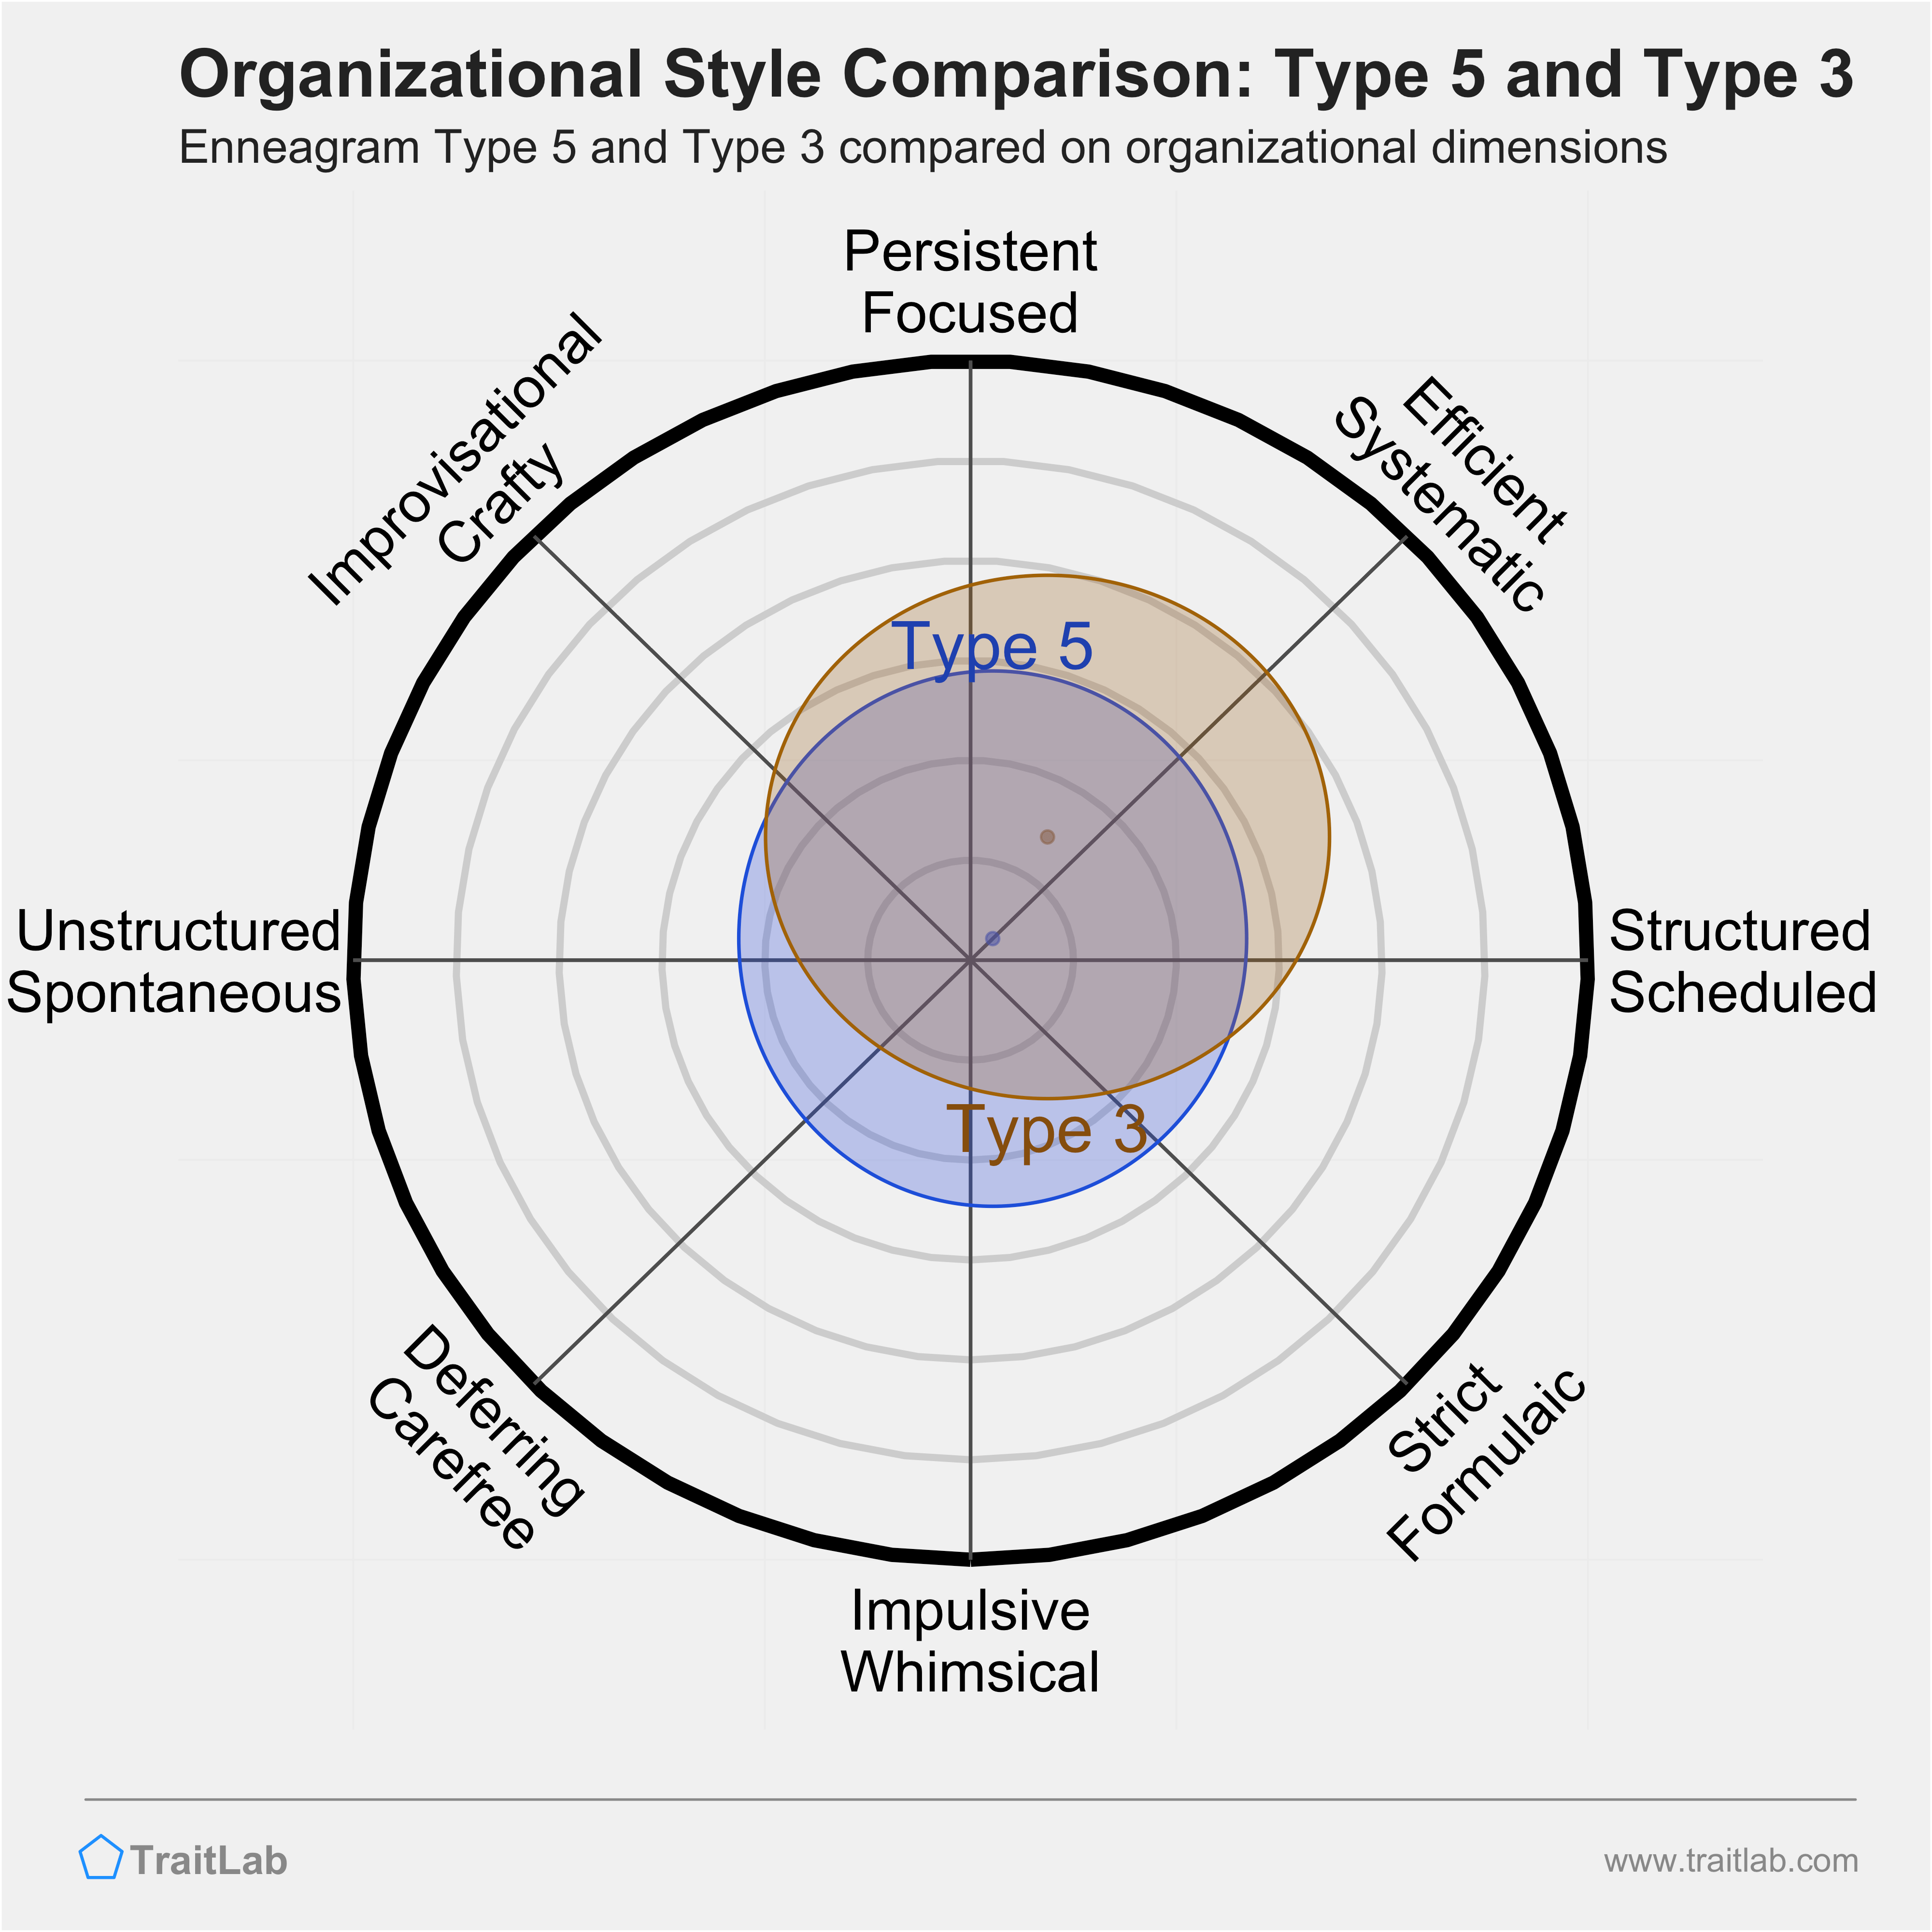 Type 5 and Type 3 comparison across organizational dimensions